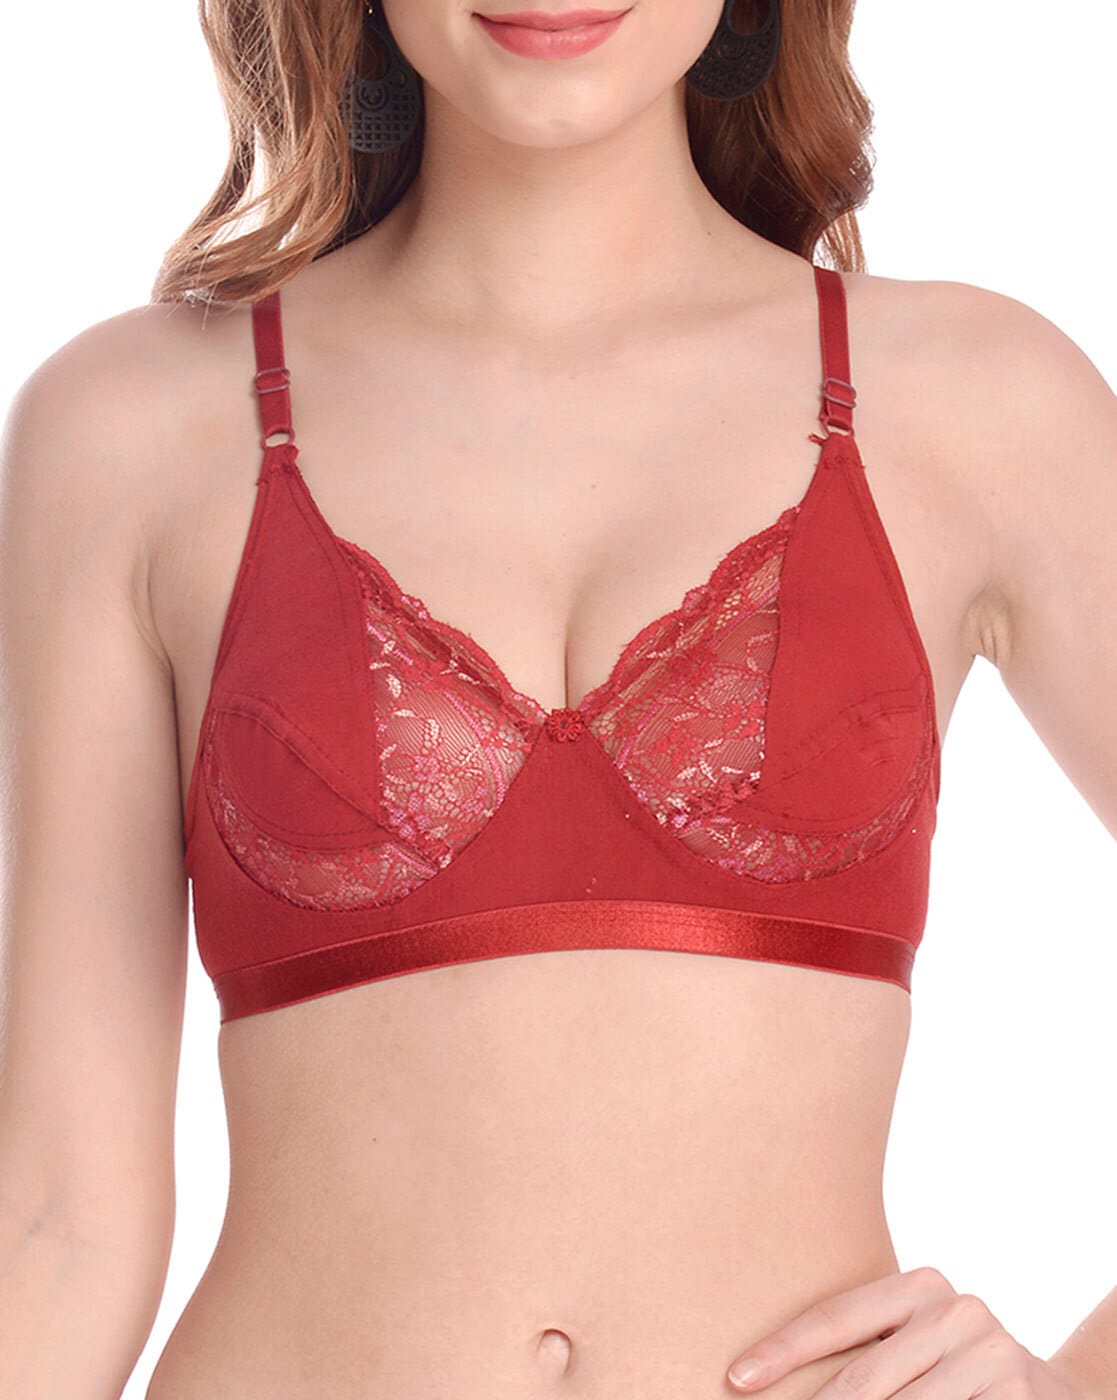 Buy Multicolored Lingerie Sets for Women by CUP'S-IN Online